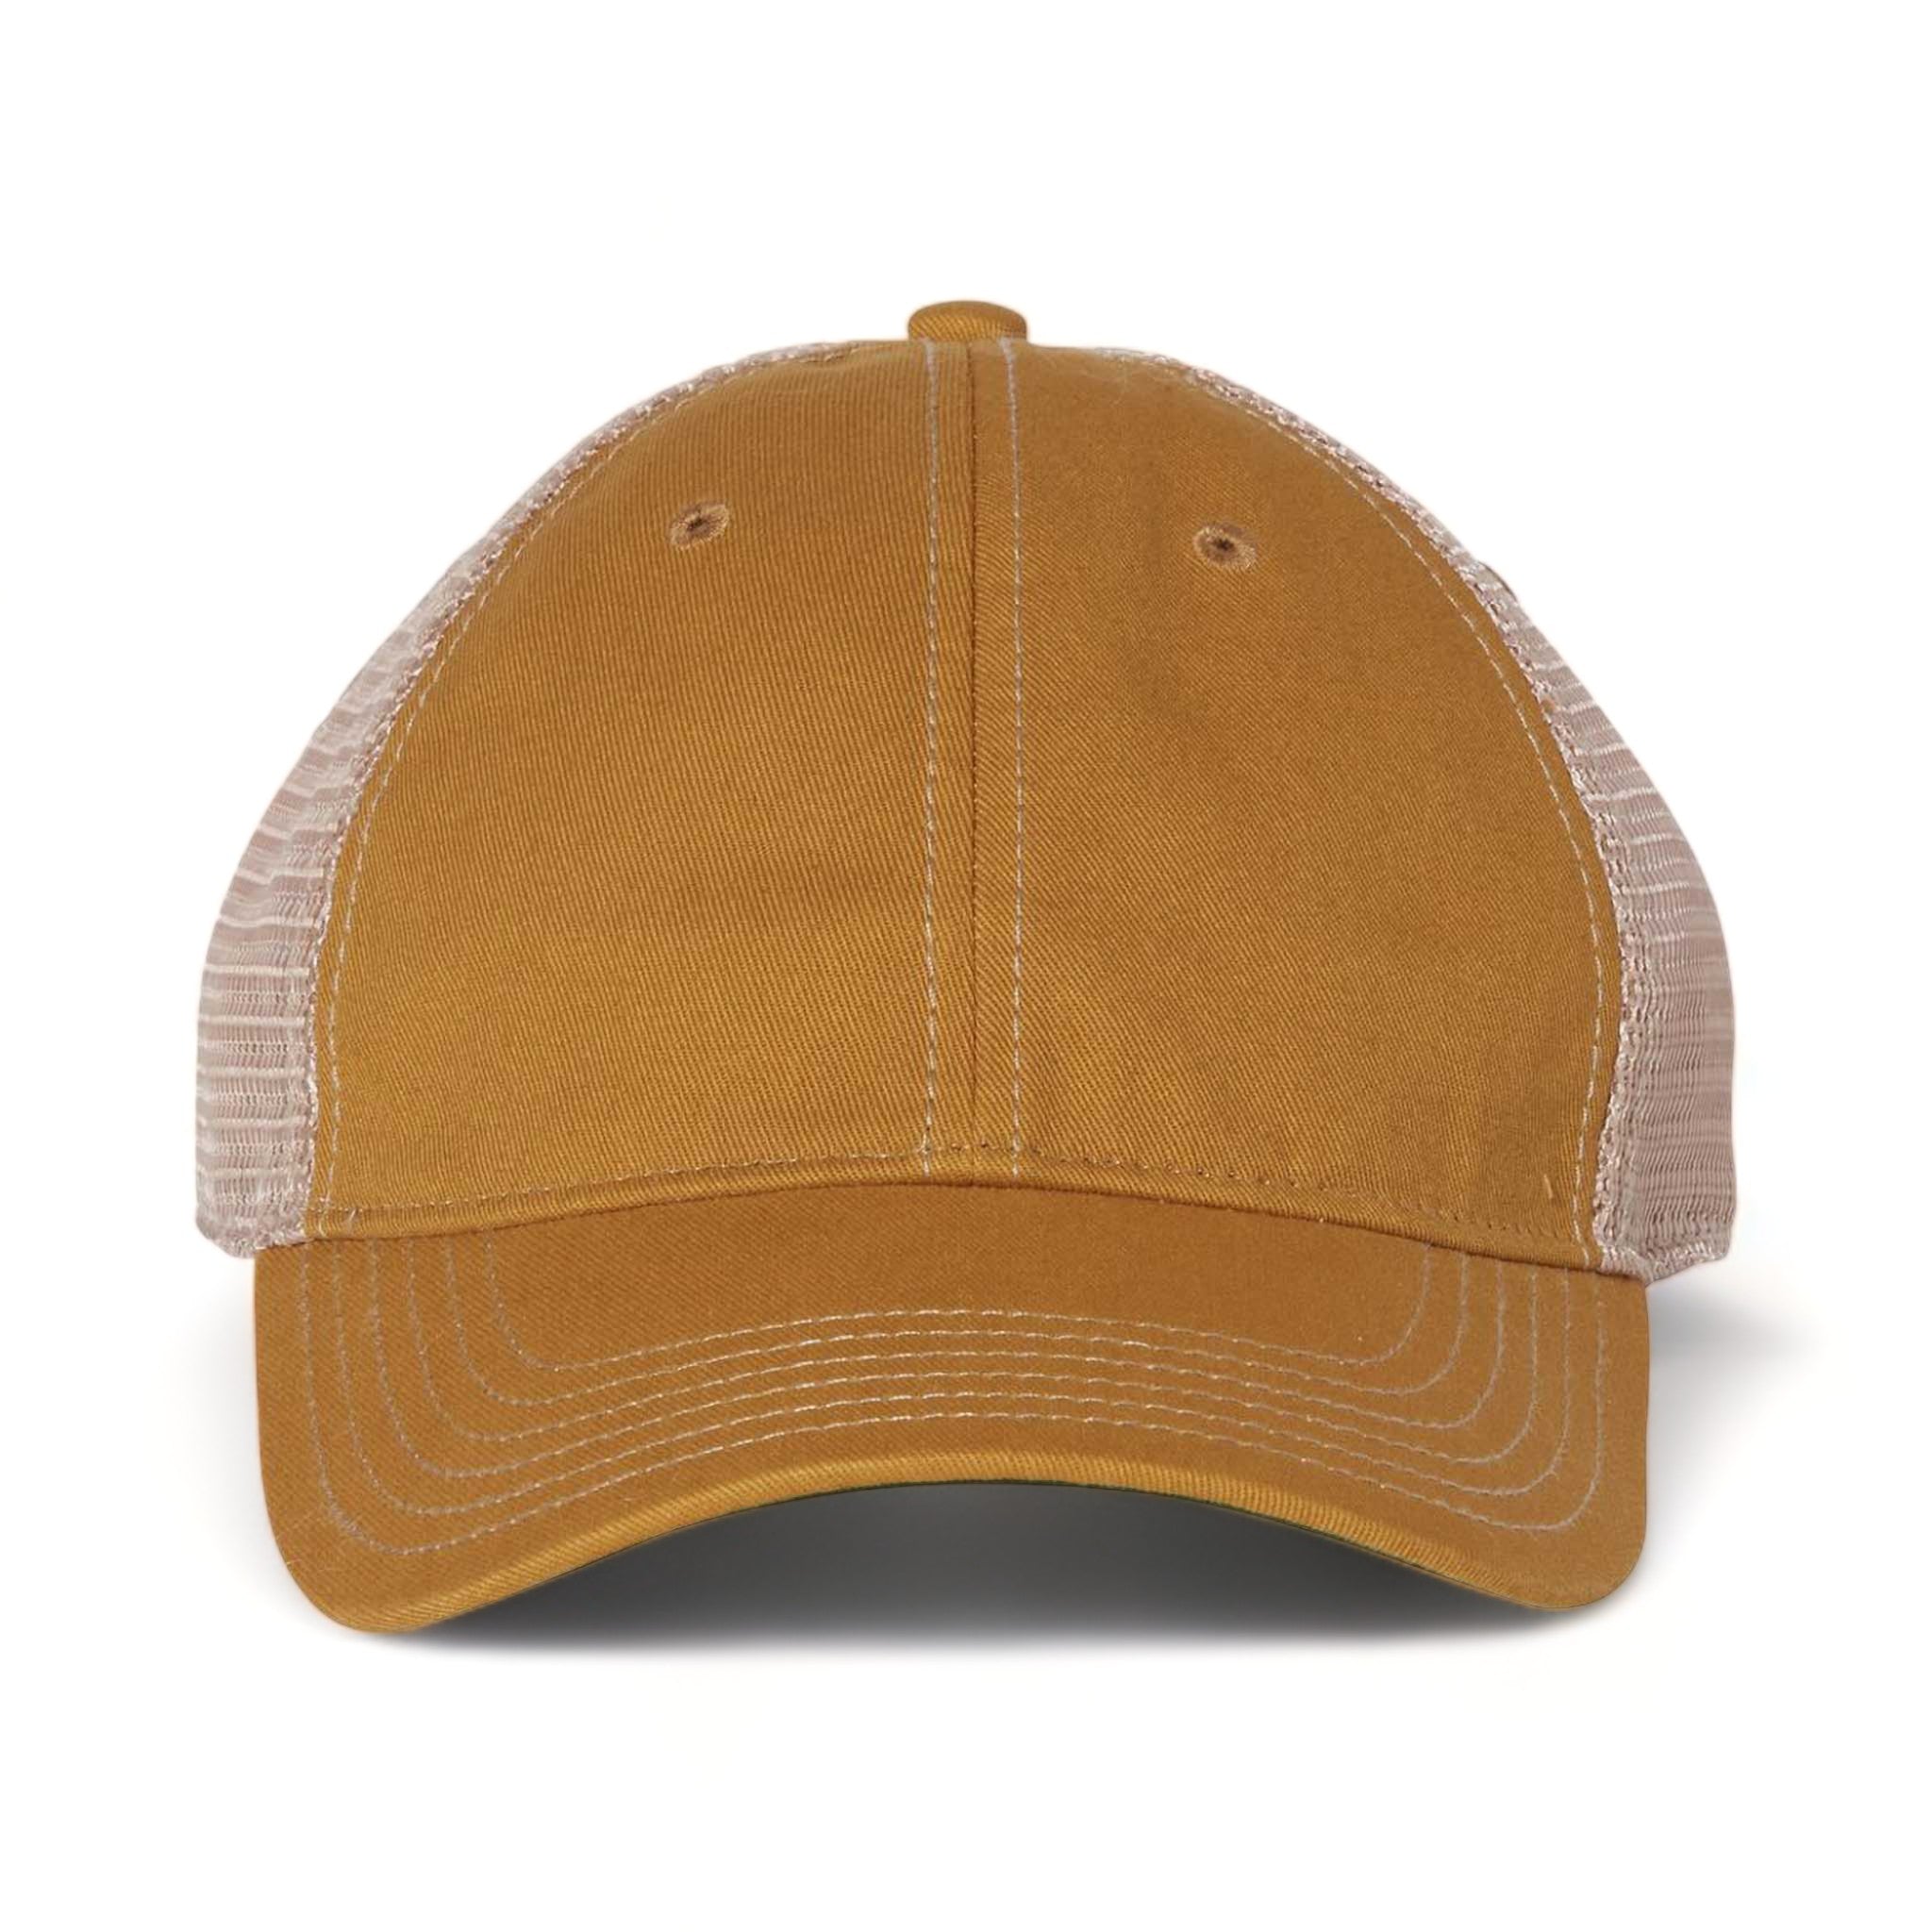 Front view of LEGACY OFA custom hat in yellow and khaki